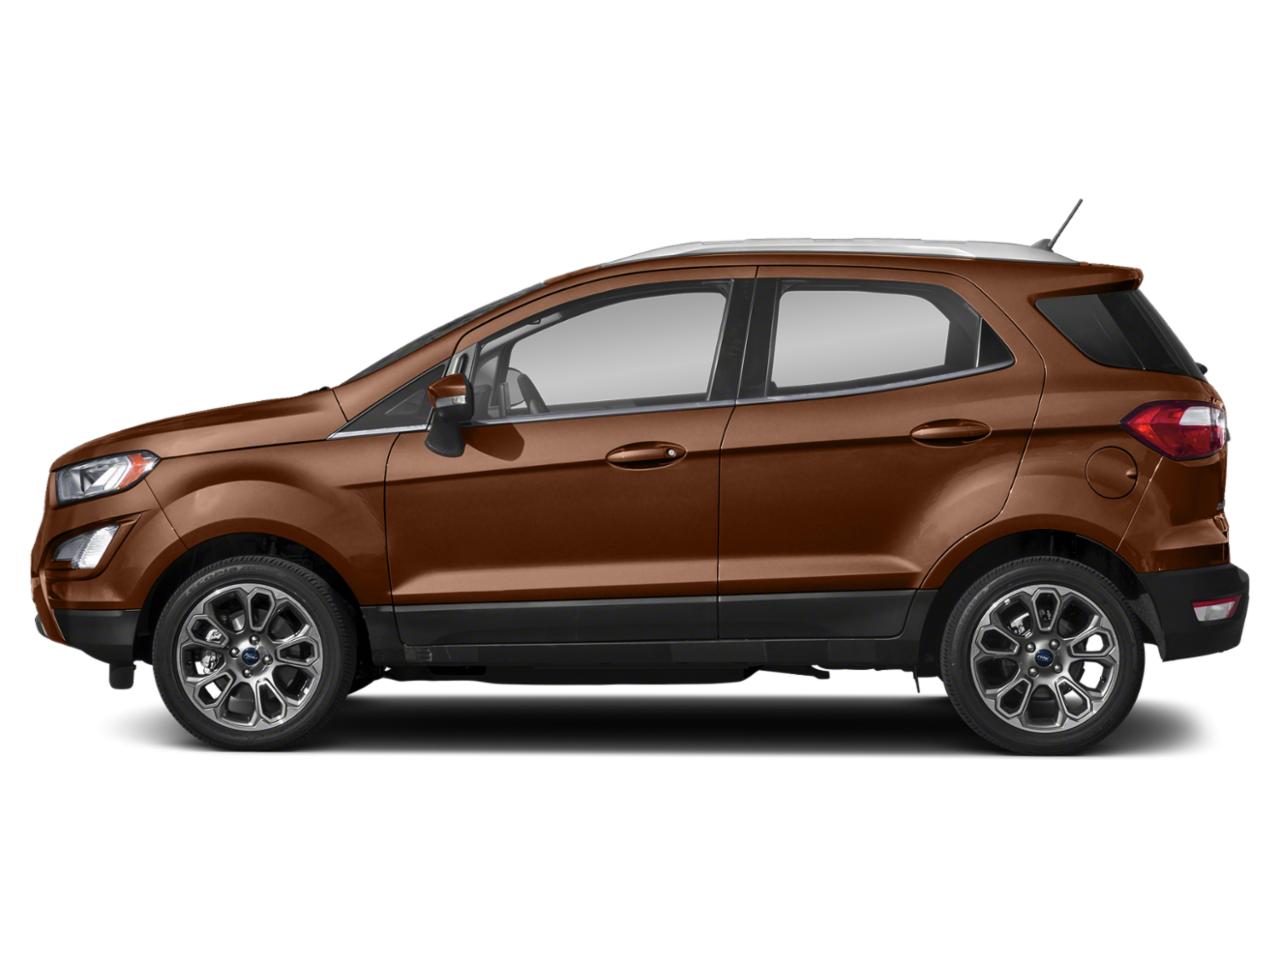 Used 2018 Ford Ecosport SES with VIN MAJ6P1CL6JC239320 for sale in Benton, AR